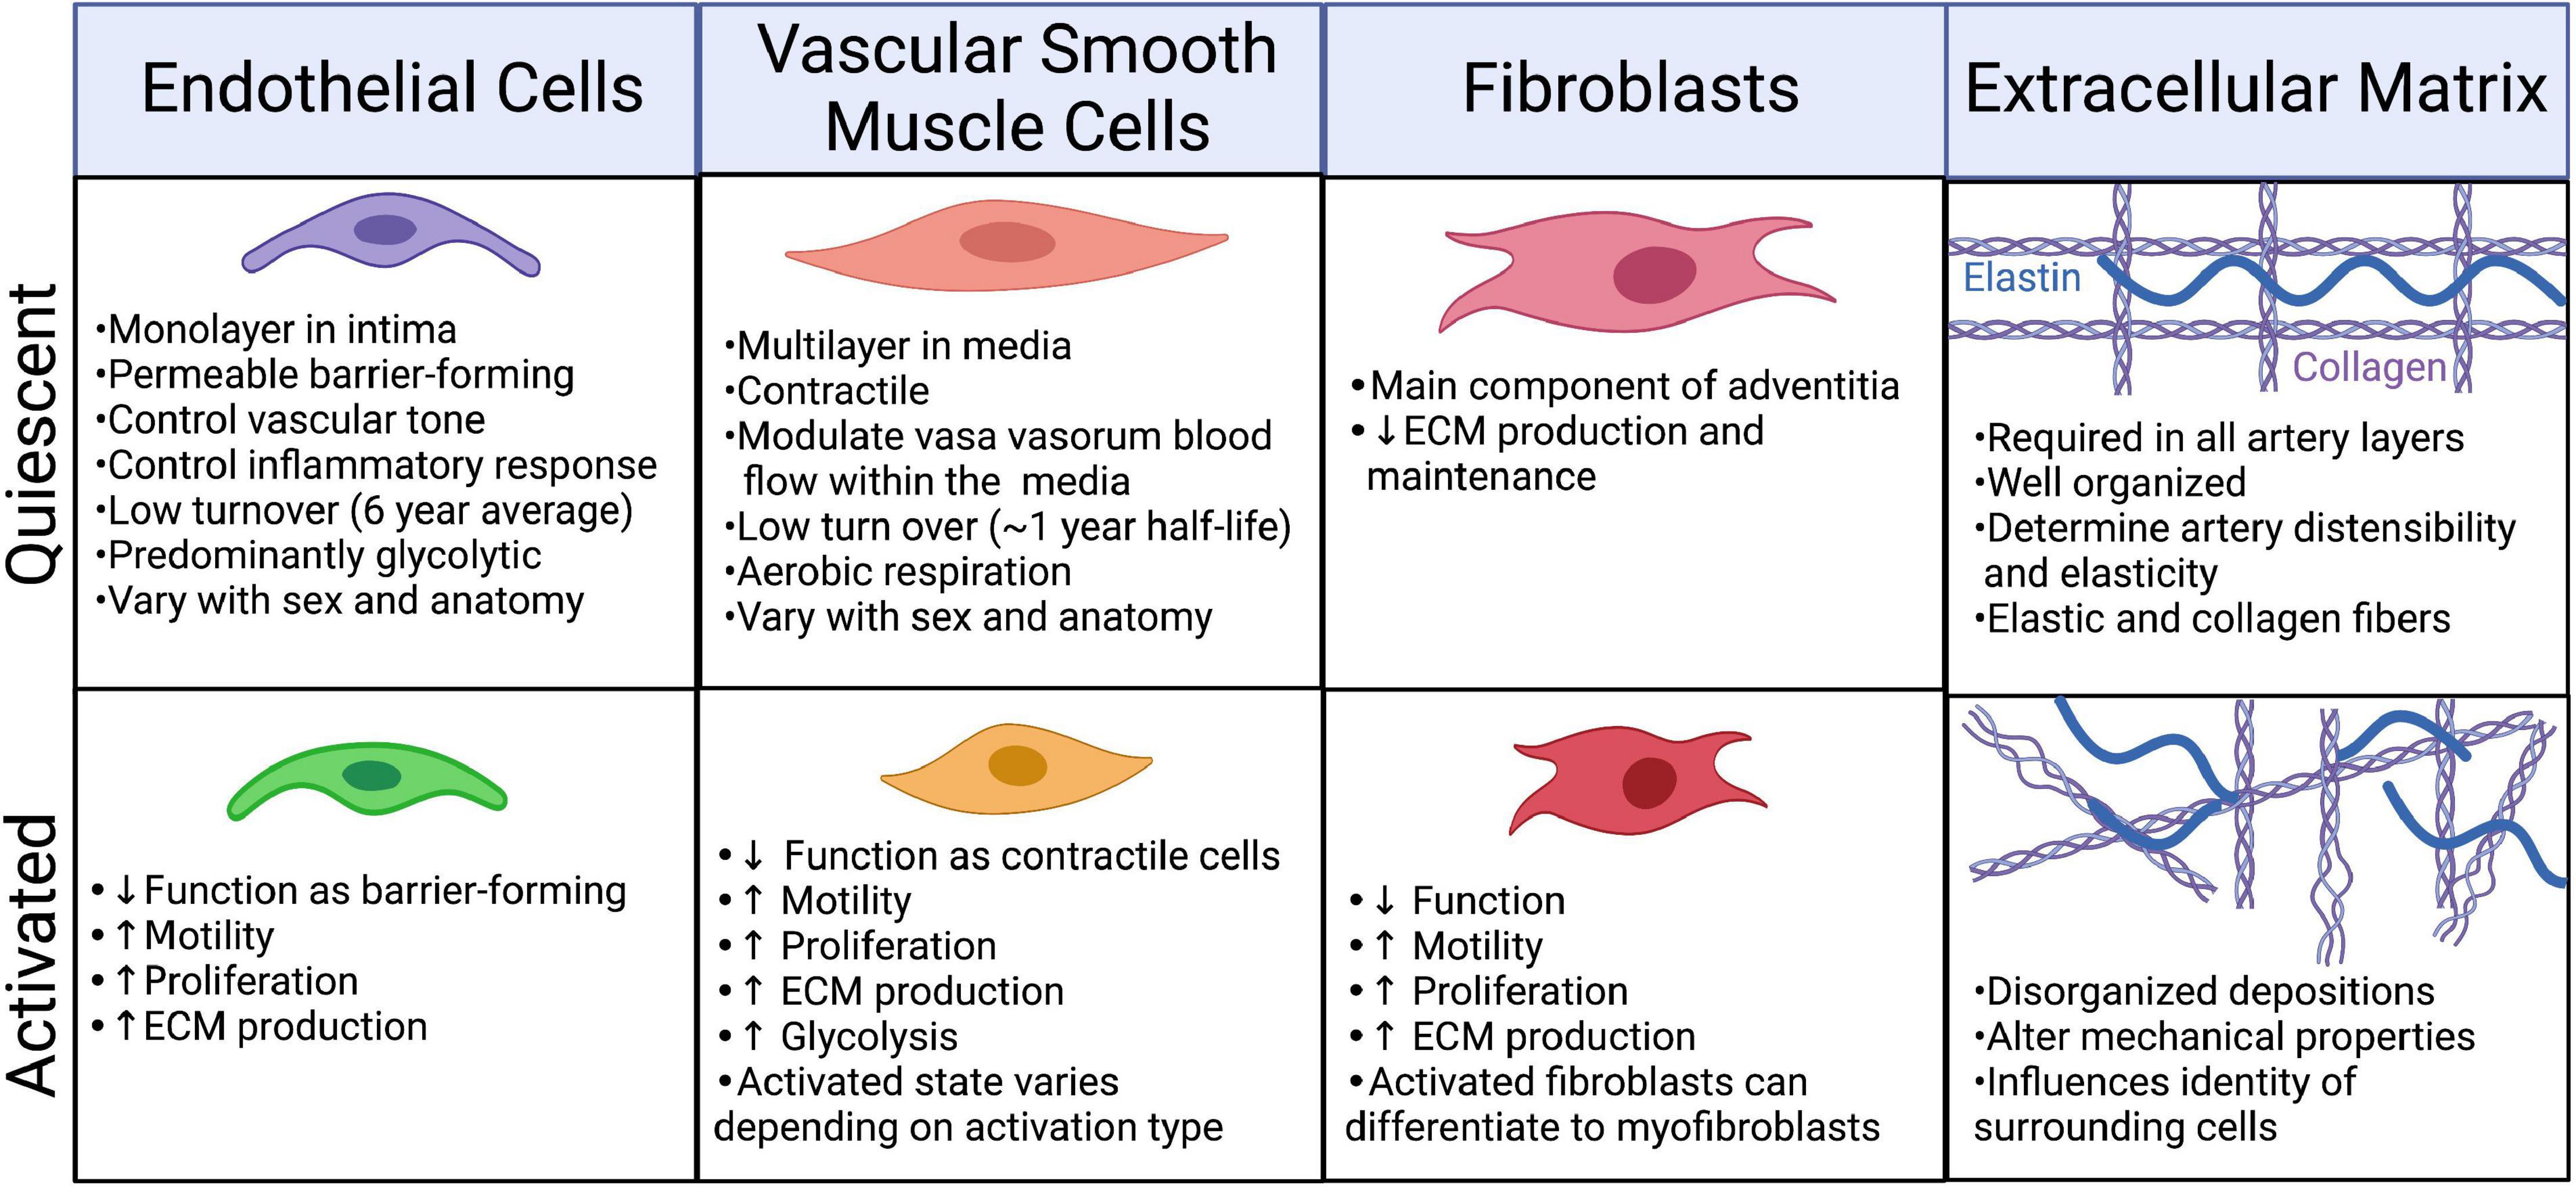 Increased Collagen Turnover Is a Feature of Fibromuscular